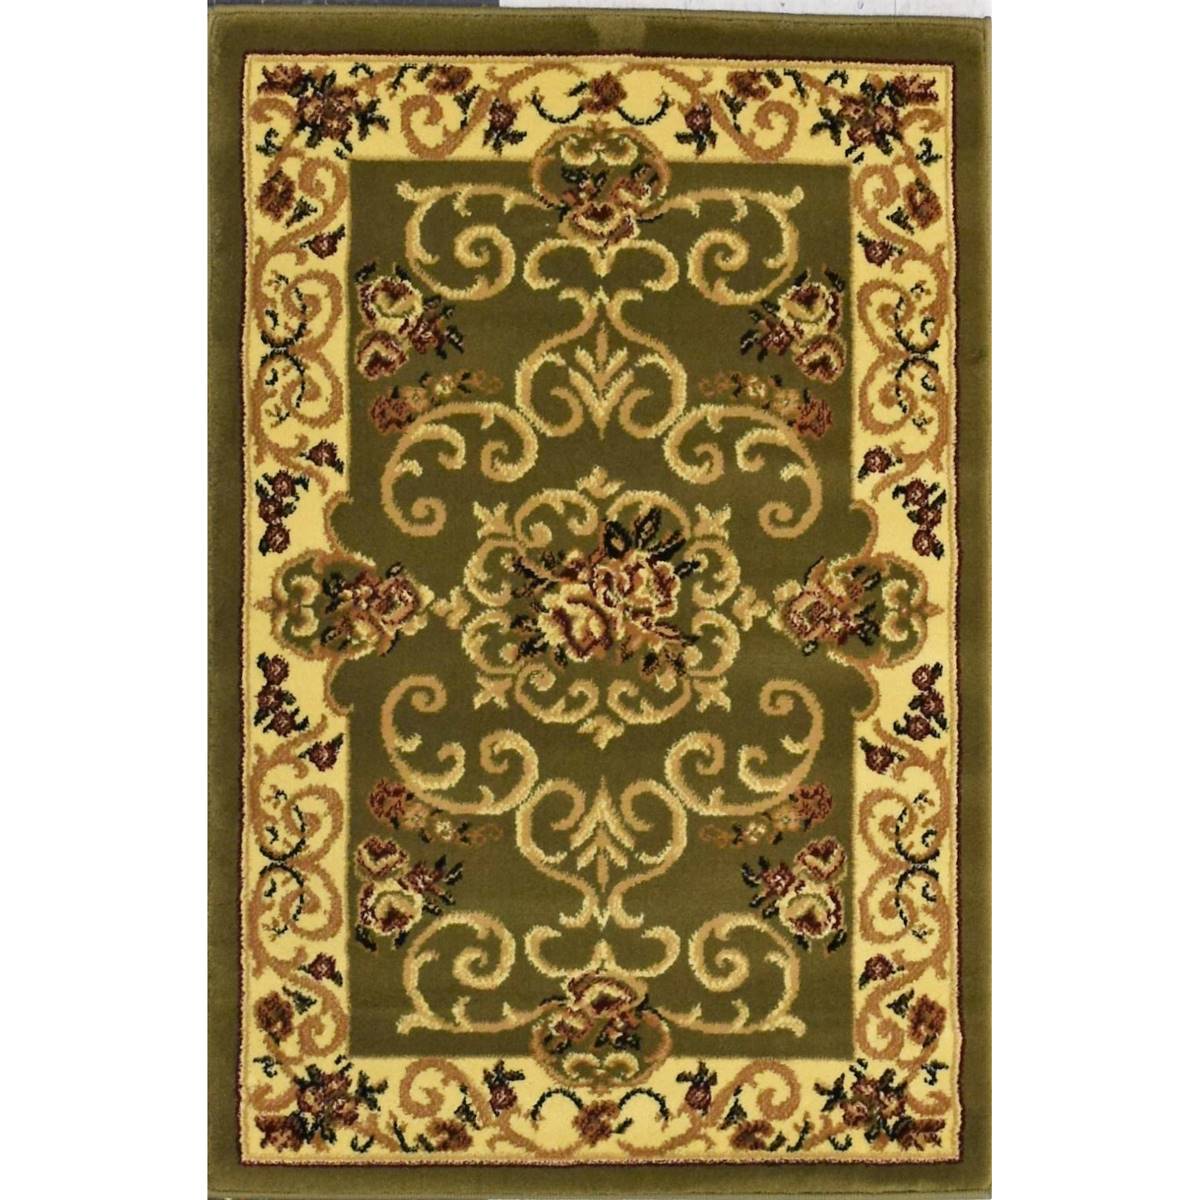 Rugs America(tm) New Vision Souvanerie Rectangle Rug-Olive